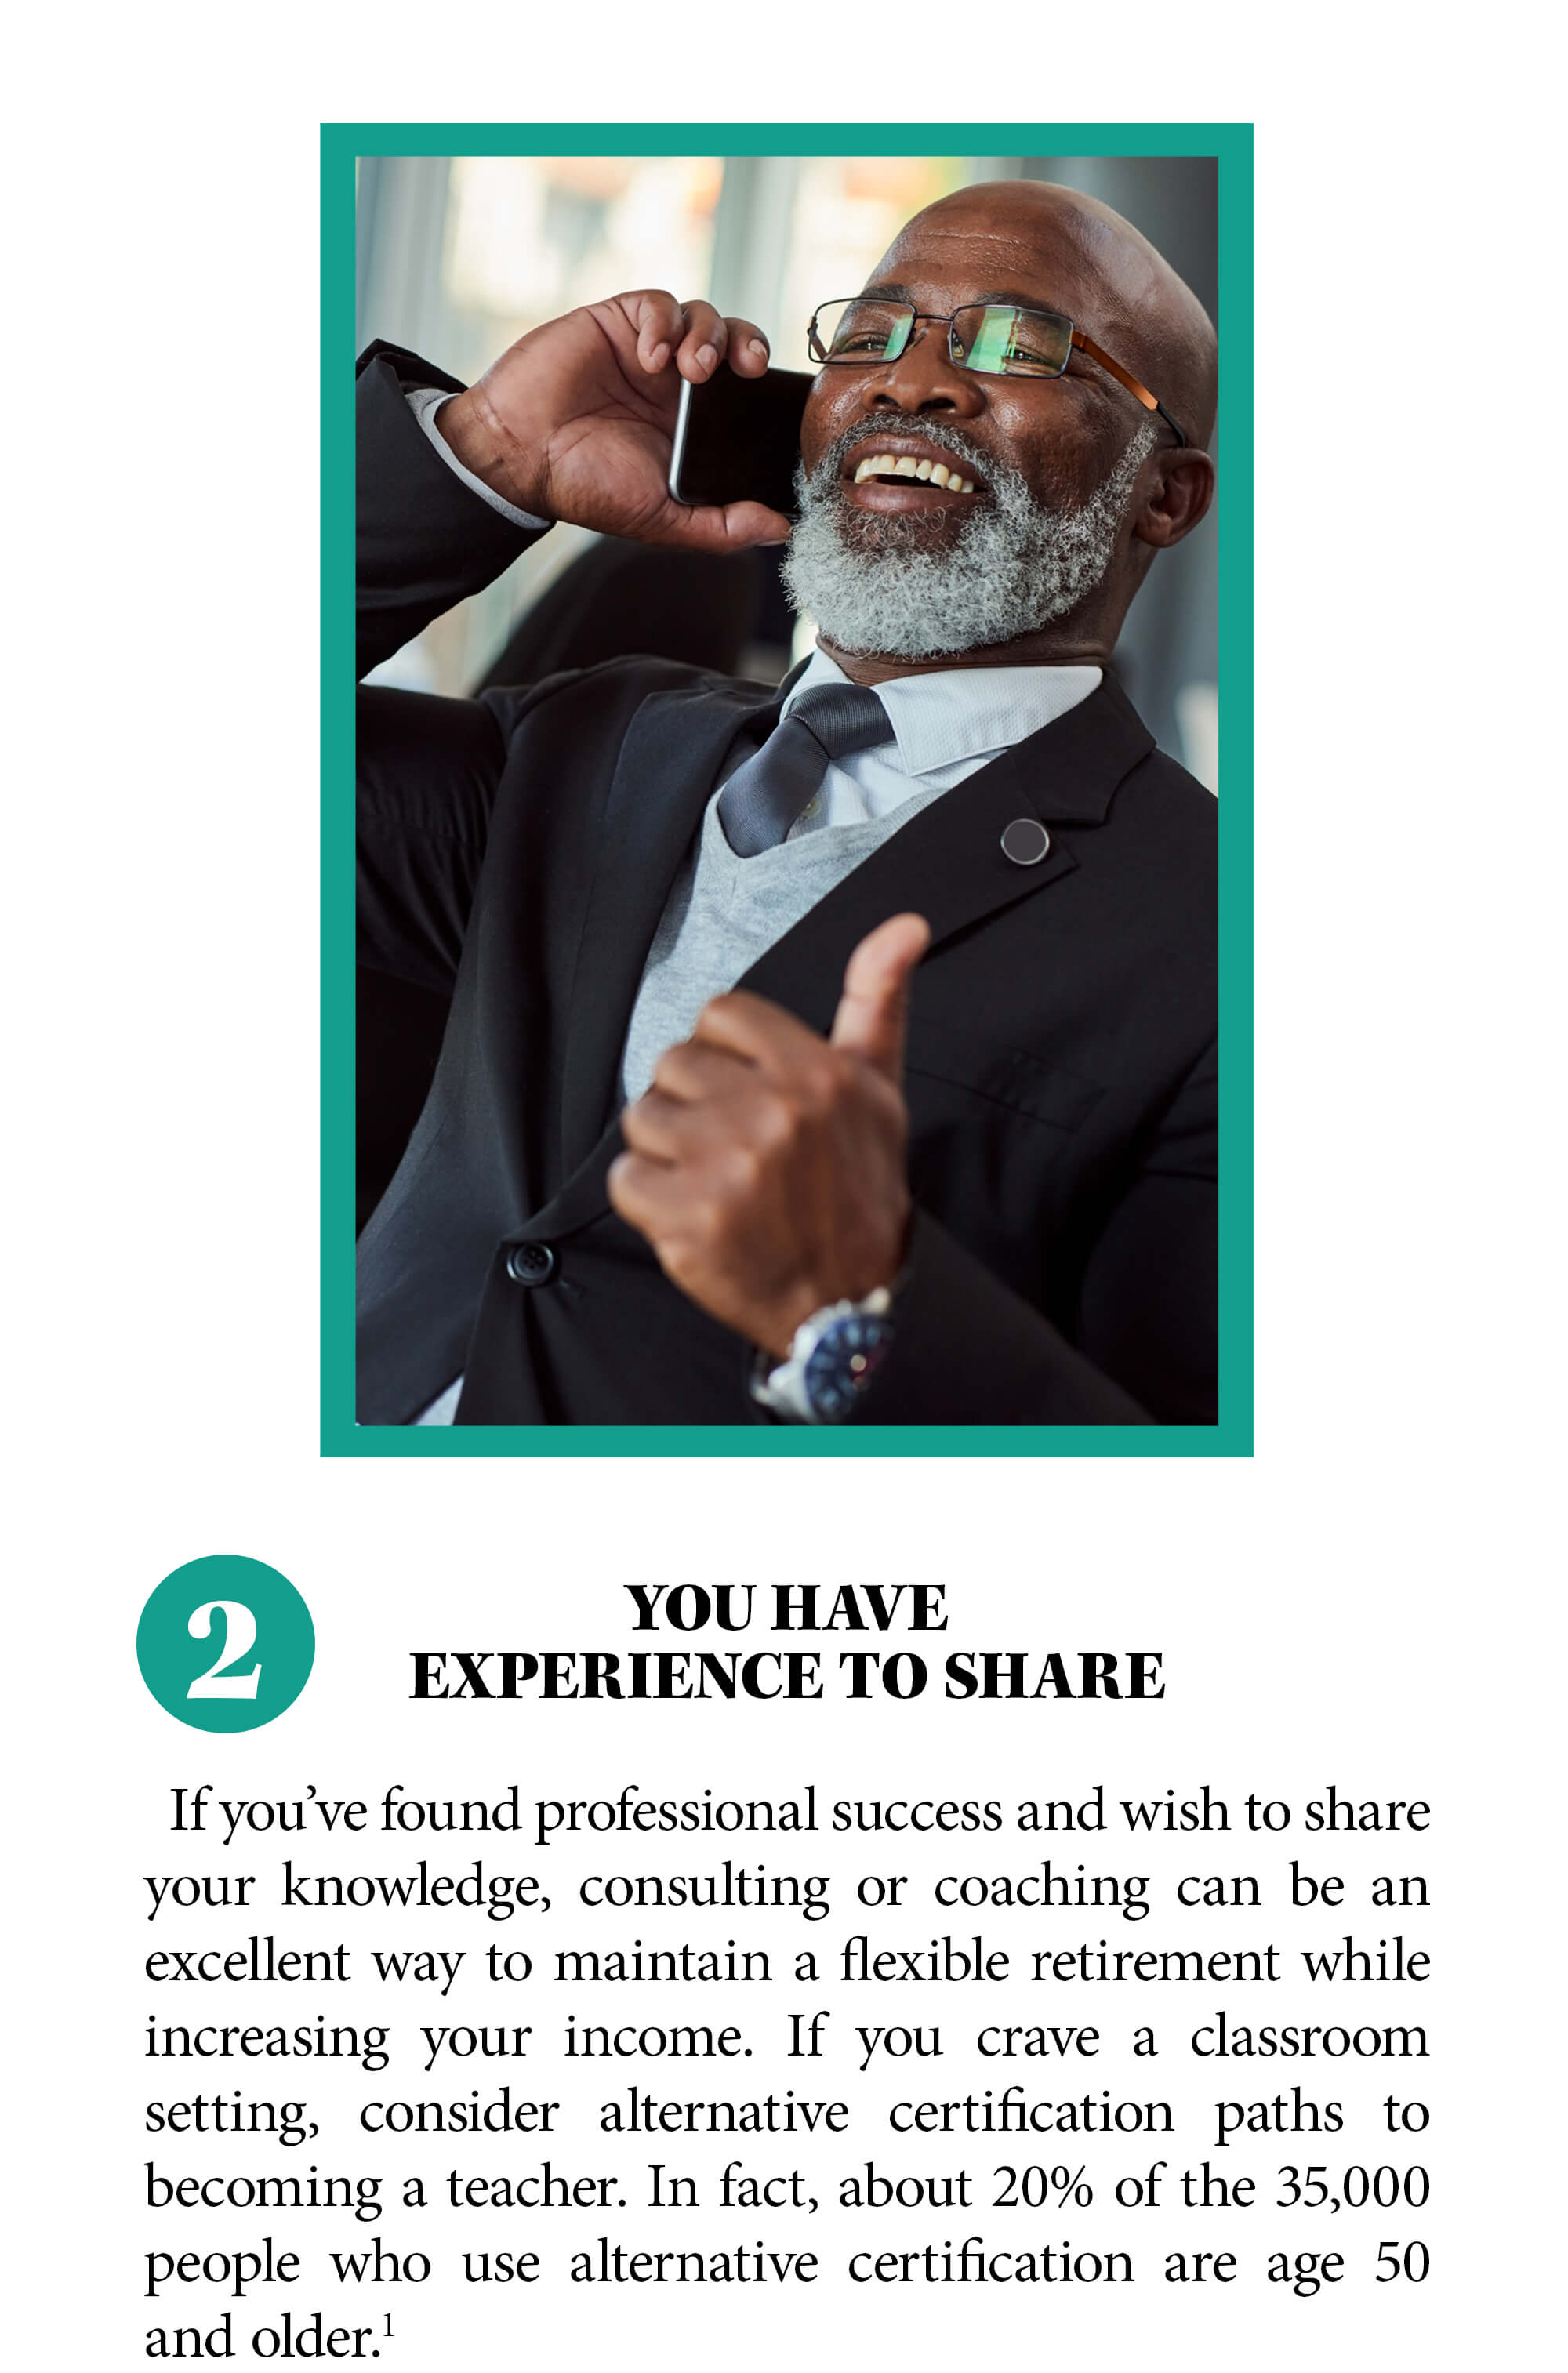 2. You have experience to share. If you’ve found professional success and wish to share your knowledge, consulting or coaching can be an excellent way to maintain a flexible retirement while increasing your income. If you crave a classroom setting, consider alternative certification paths to becoming a teacher. In fact, about 20% of the 35,000 people who use alternative certification are age 50 and older. Source 1